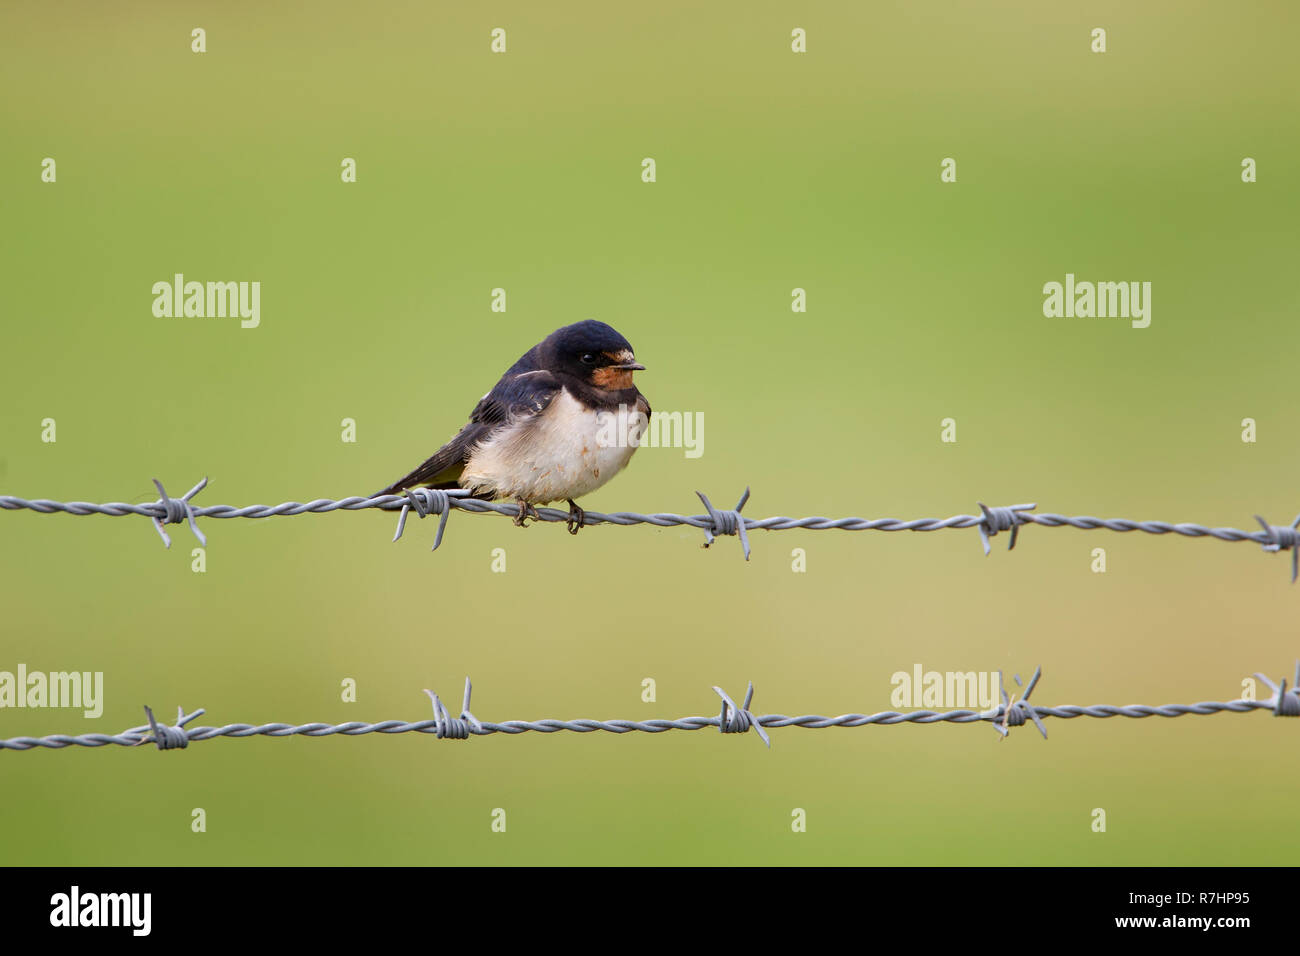 Swallow Hirundo rustica perching on a barbed wire fence against a diffuse green background Stock Photo